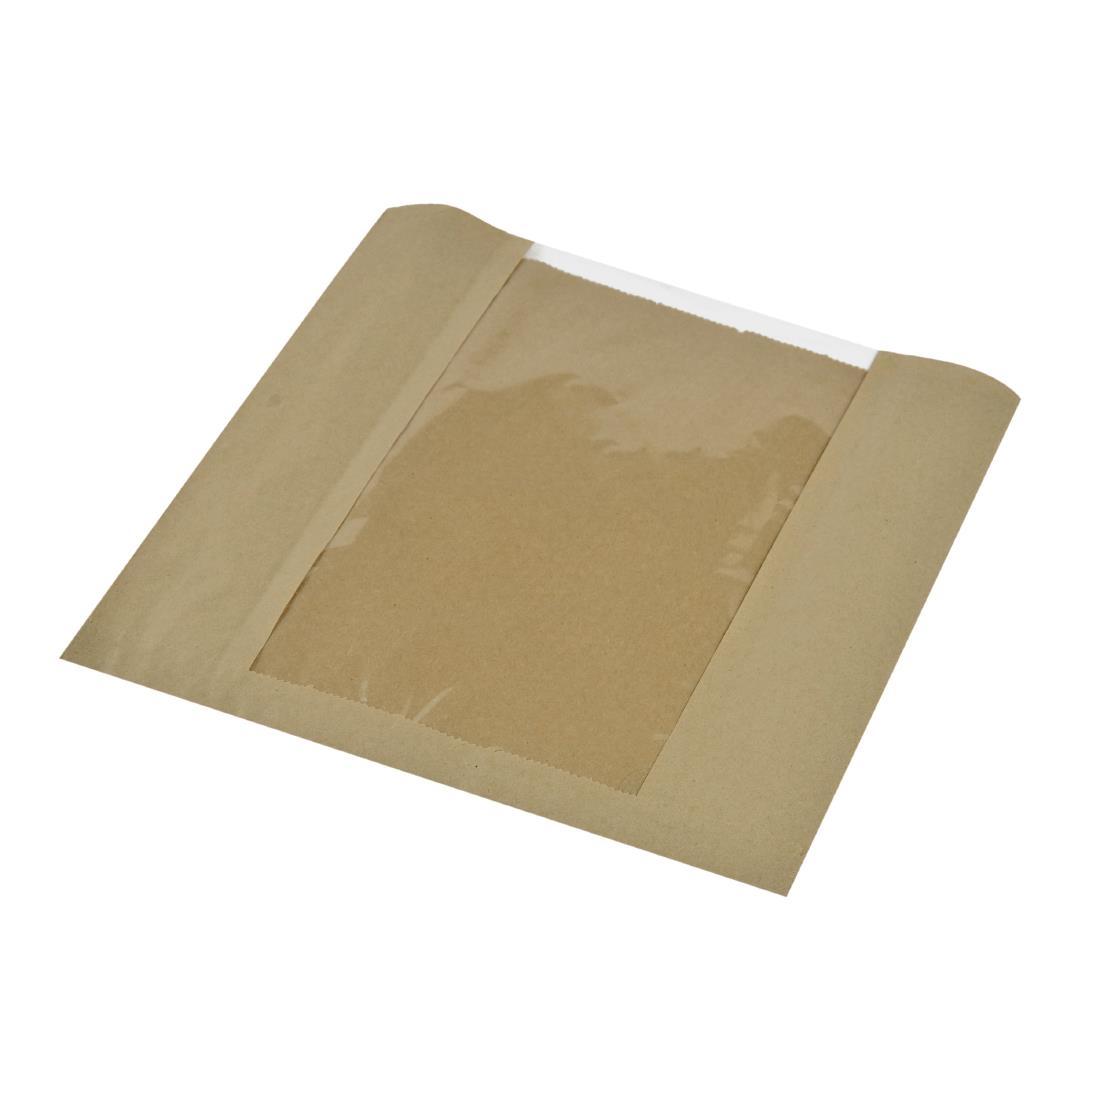 Vegware Compostable Kraft Sandwich Bags With PLA Window Large (Pack of 1000) - DW638  - 1